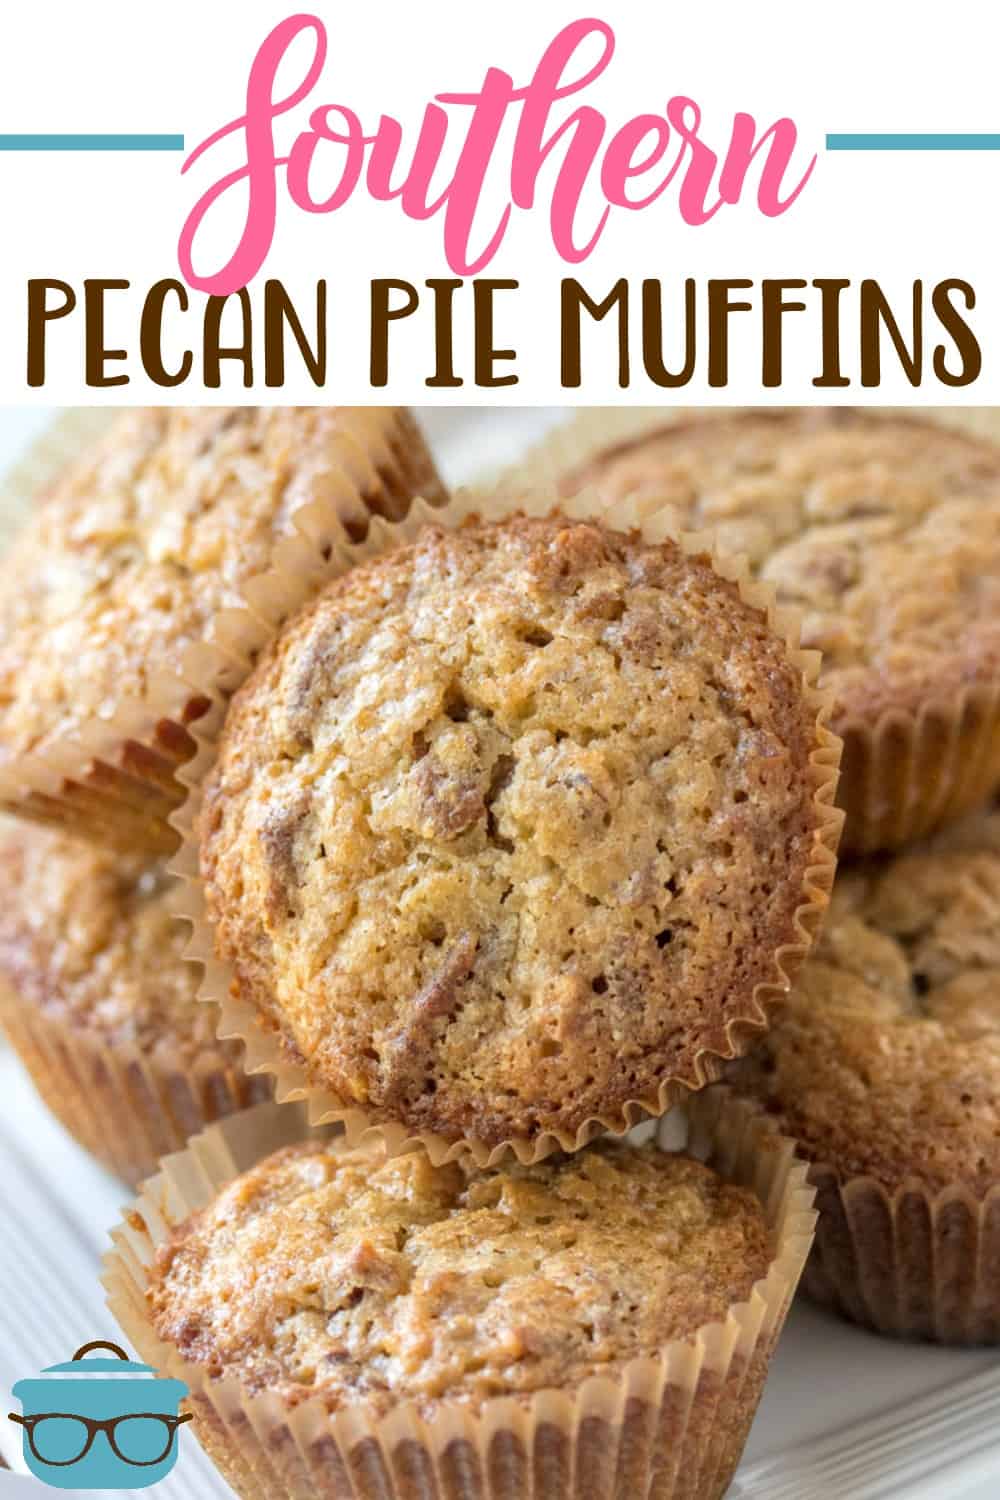 Southern Pecan Pie Muffins recipe from The Country Cook. Closeup photo of pecan pie muffins stacked on top of each other. 